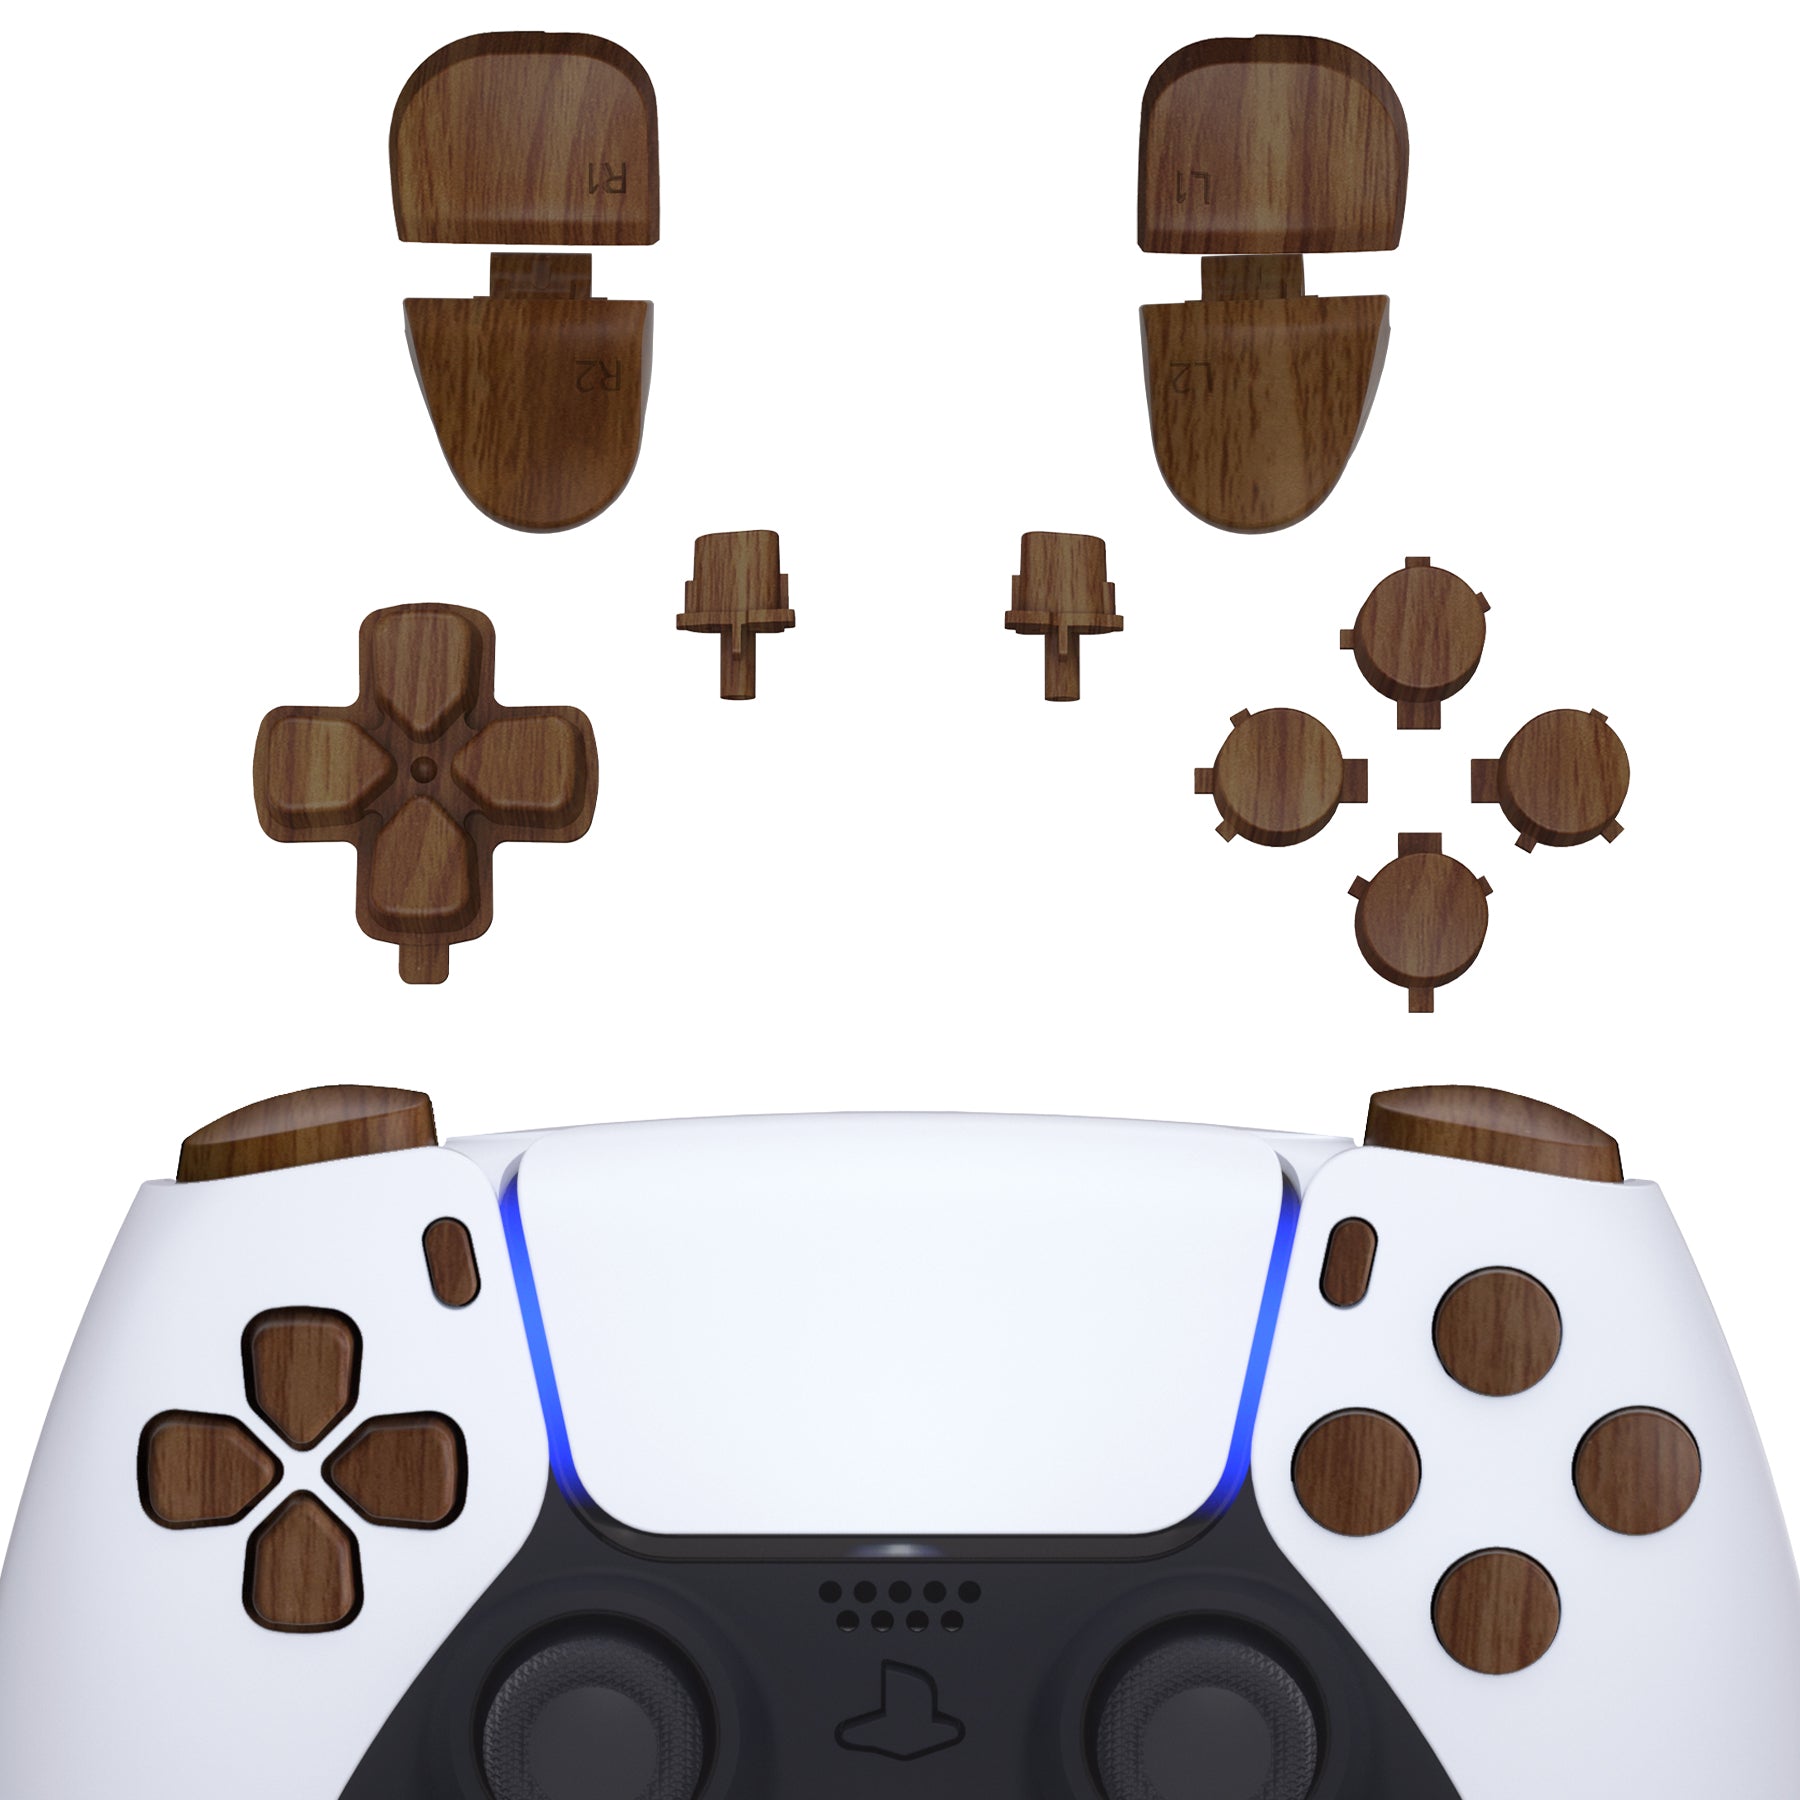 eXtremeRate Retail Replacement D-pad R1 L1 R2 L2 Triggers Share Options Face Buttons, Wood Grain Full Set Buttons Compatible with ps5 Controller BDM-030 - JPF9001G3